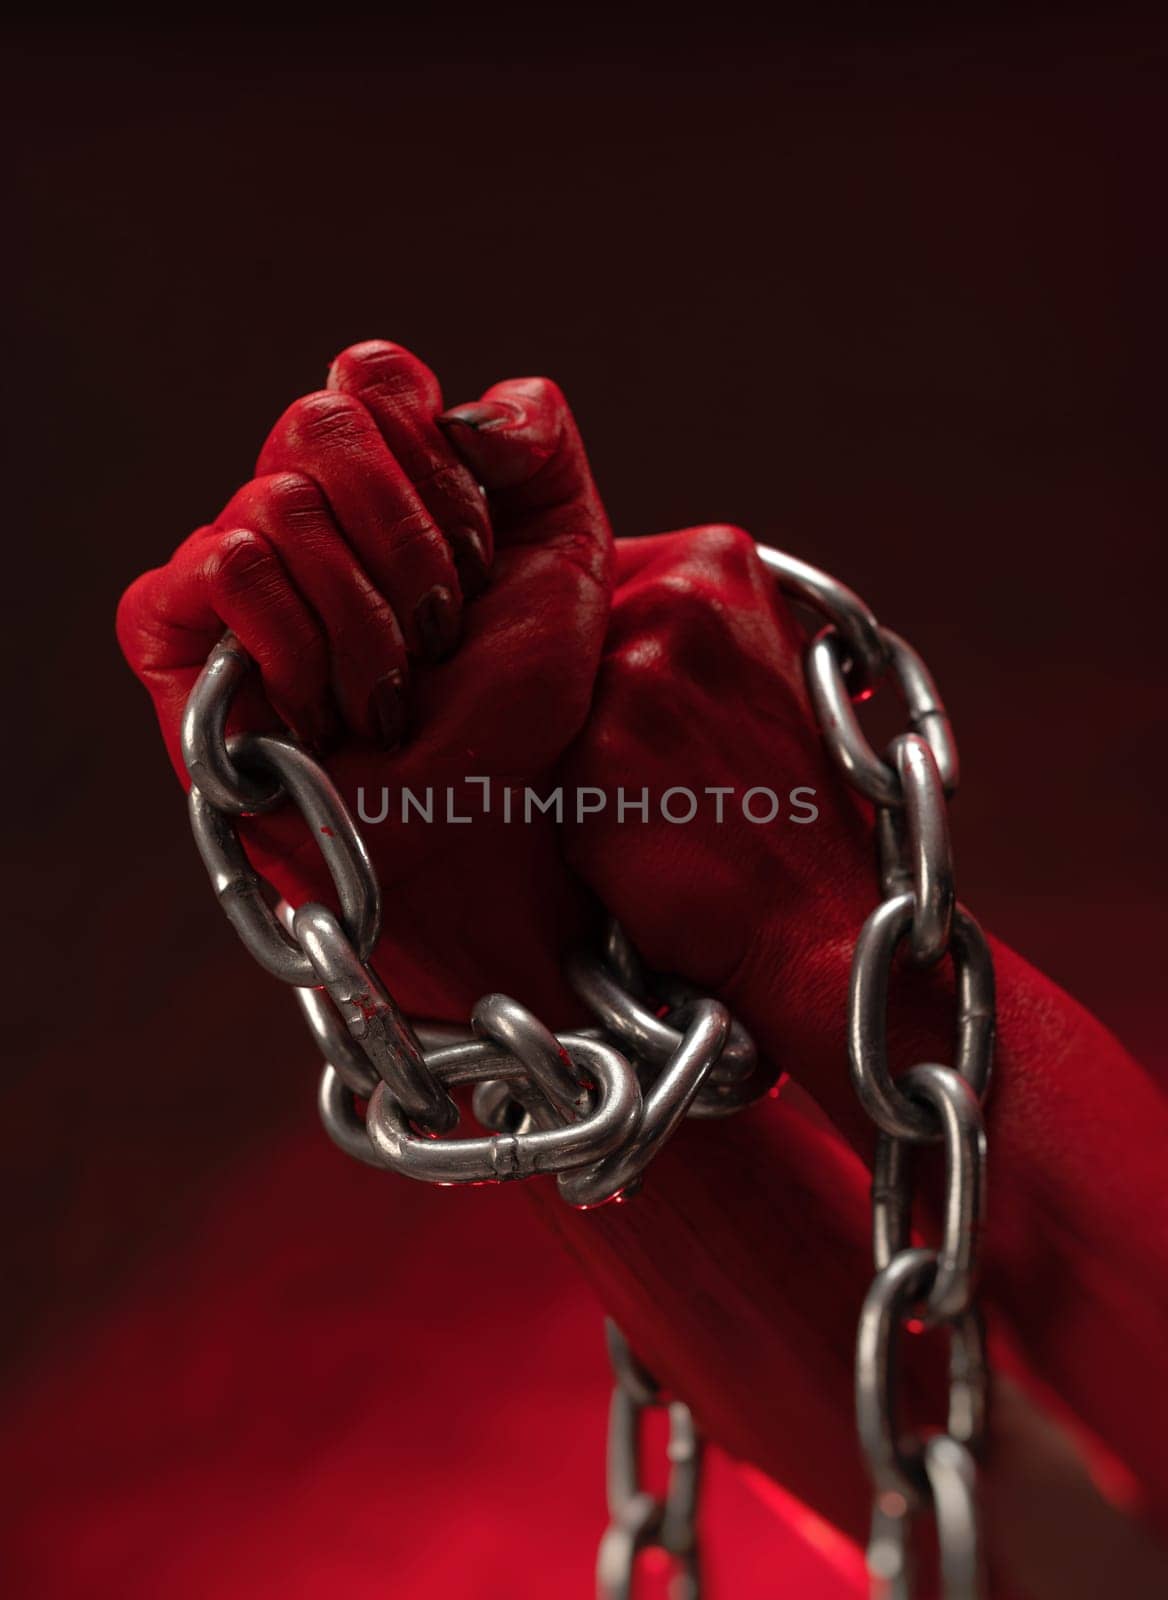 bloodied hands clenched into fists in the shackles of a metal chain symbolize slavery, protest and the struggle for freedom by Rotozey